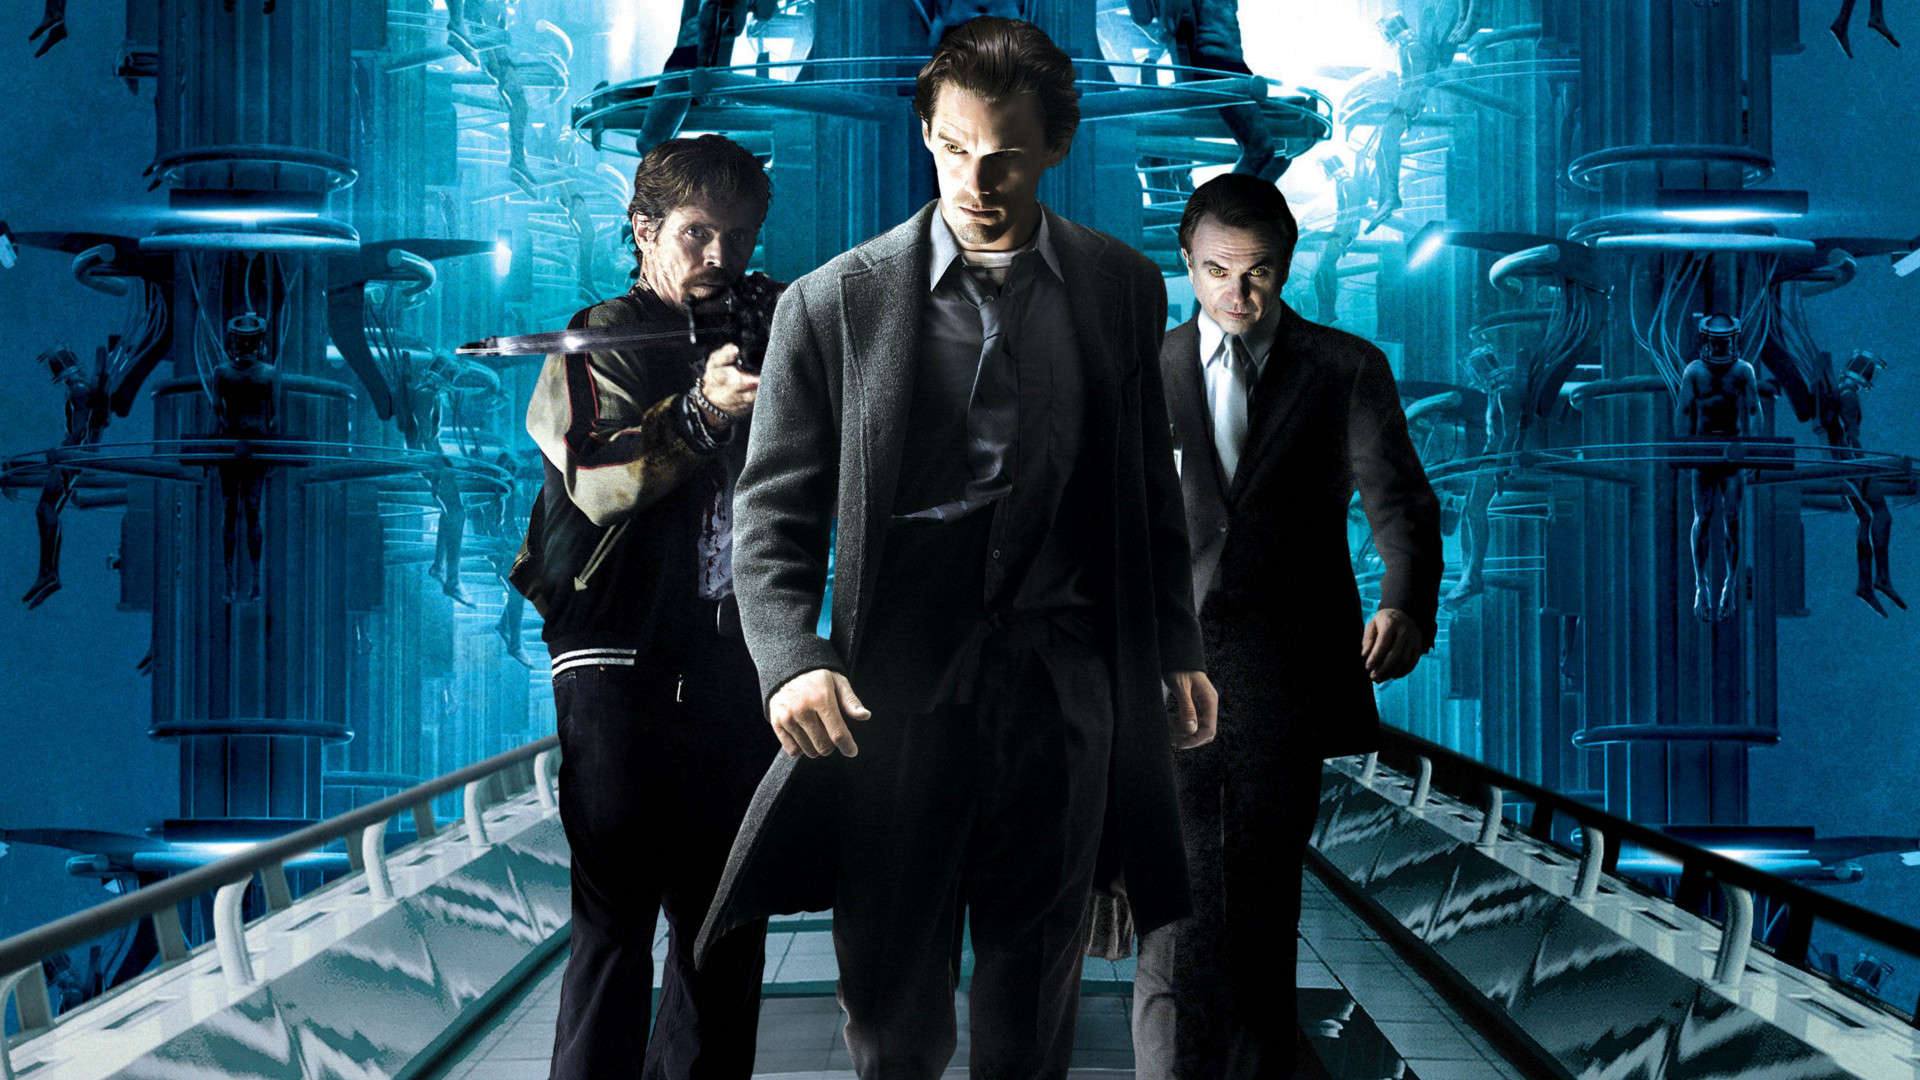 Banner Phim Tử Chiến Ma Cà Rồng (Daybreakers)